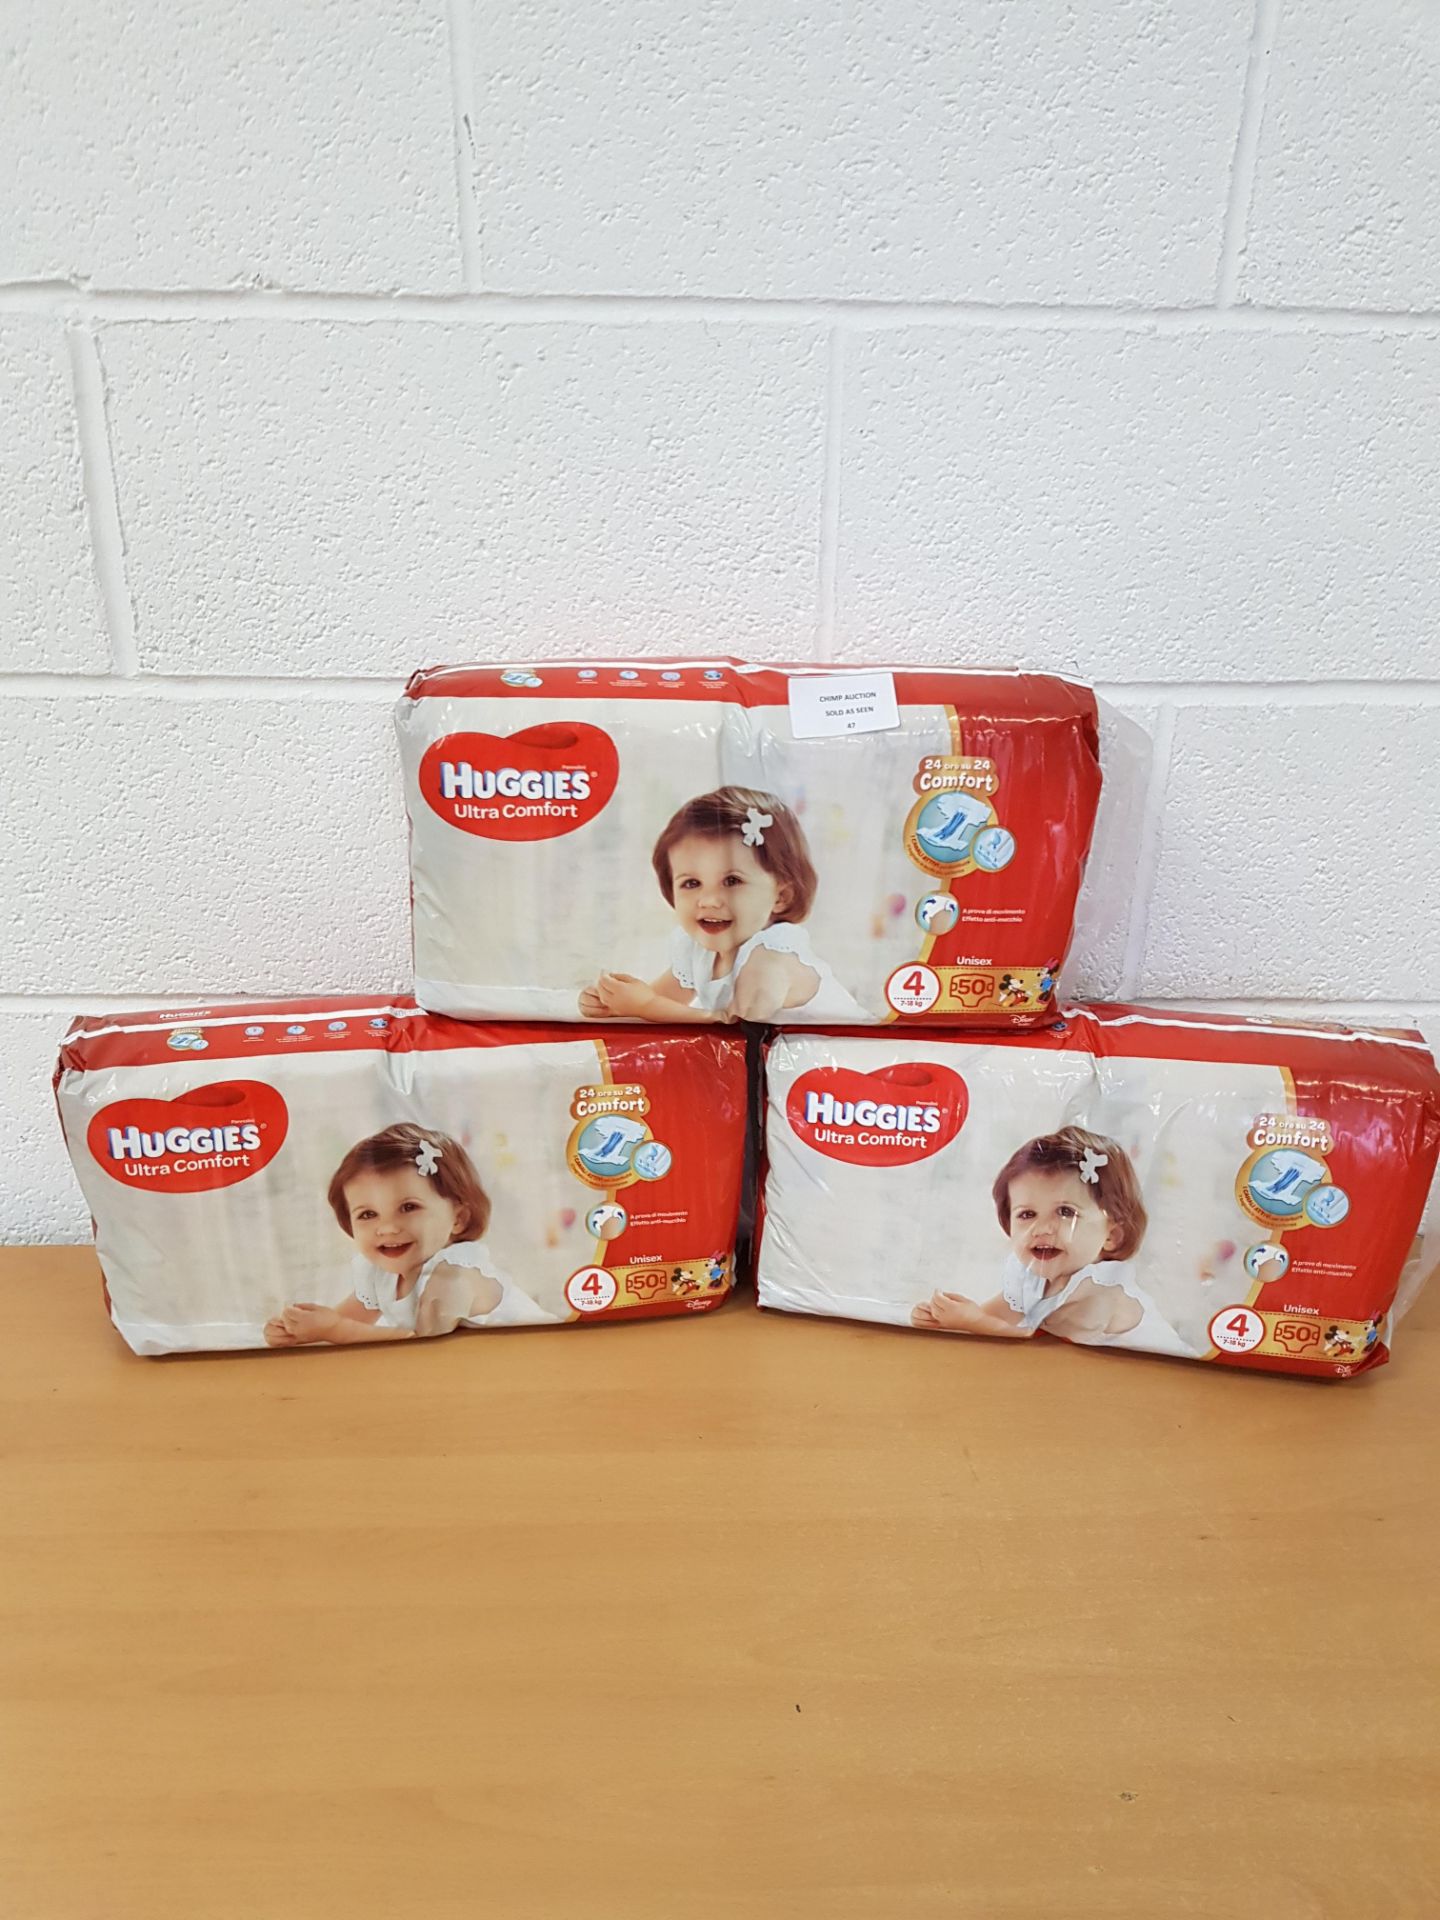 Brand new Huggies Nappies Size 4, 7-18KG Month Supply (150x pieces)